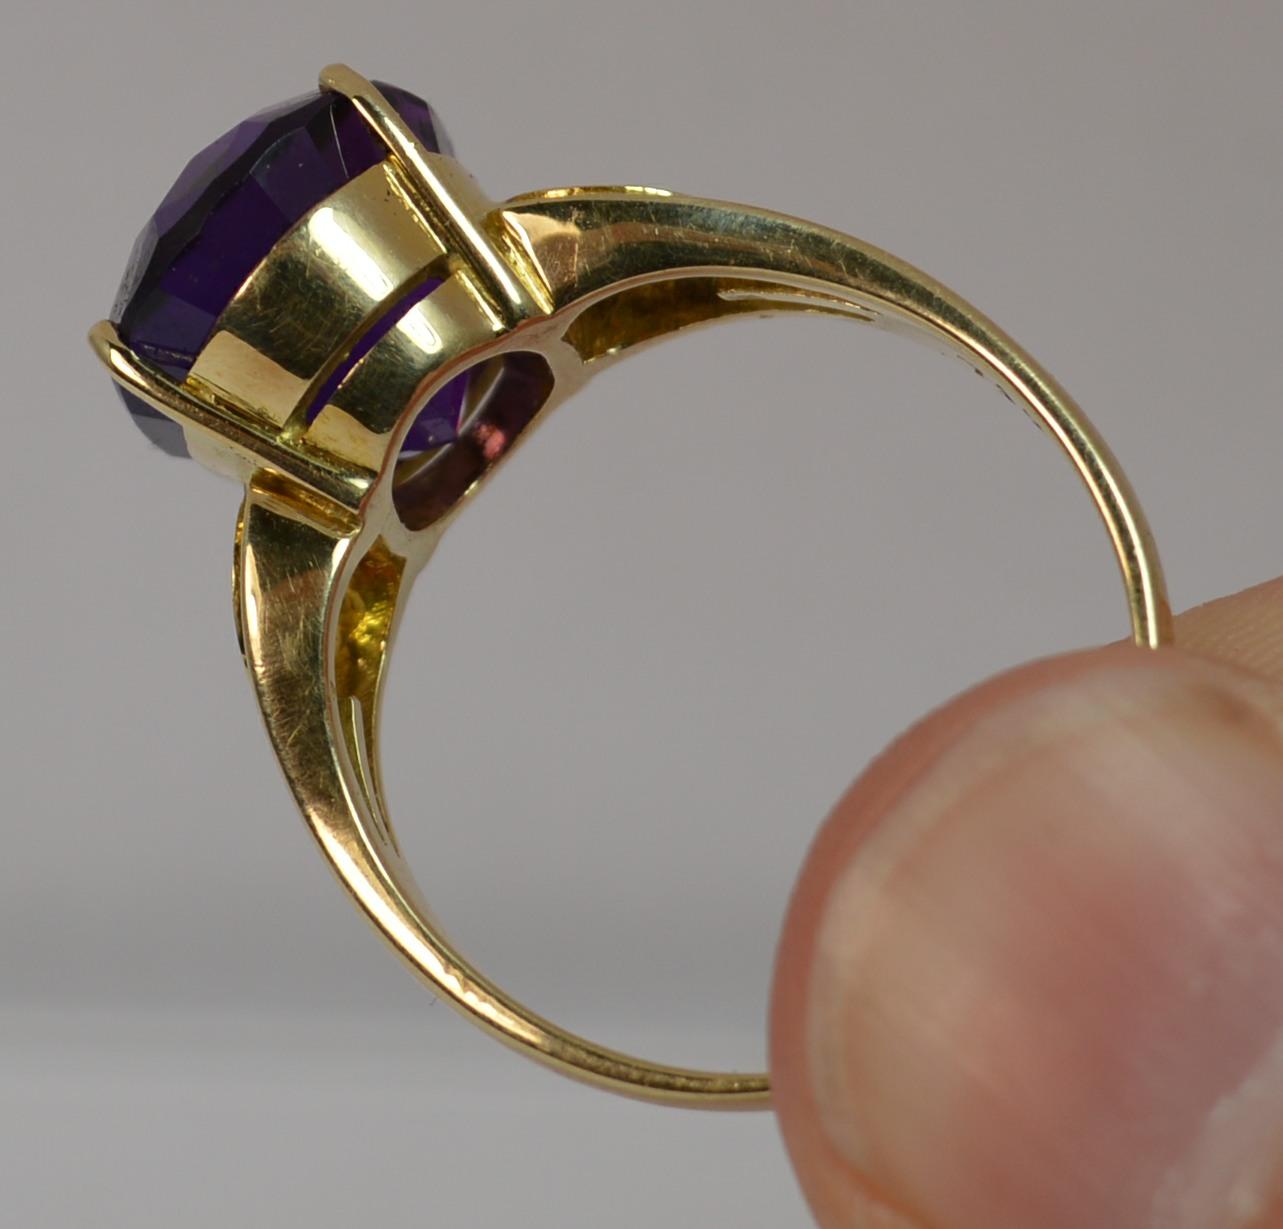 
A stunning 14ct Gold, Amethyst and Diamond ring.

Large oval cut amethyst to measure 11mm x 13.8mm with a natural diamond to each side. Protrudes 8mm off the finger.

Beautifully deep purple colour to the amethyst.

Modelled in a solid and